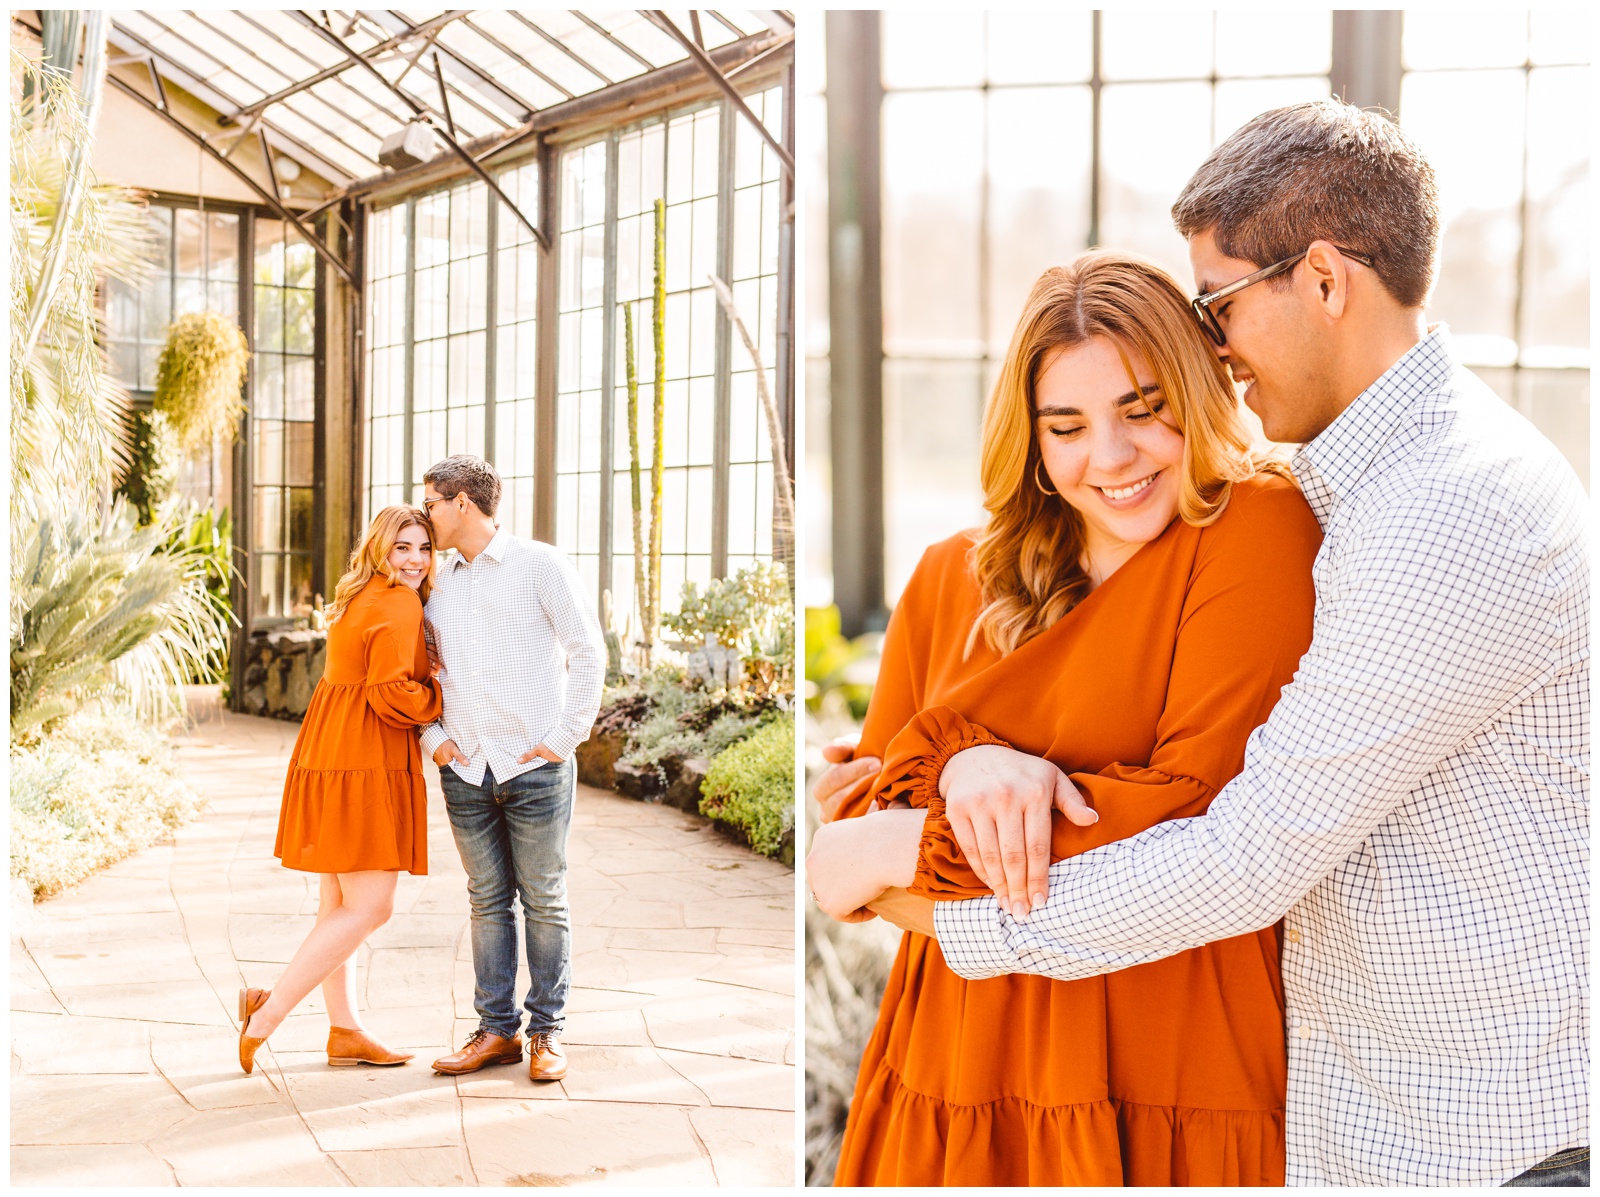 Winter Engagement Session Tips - Maryland Wedding Education - Brooke Michelle Photography